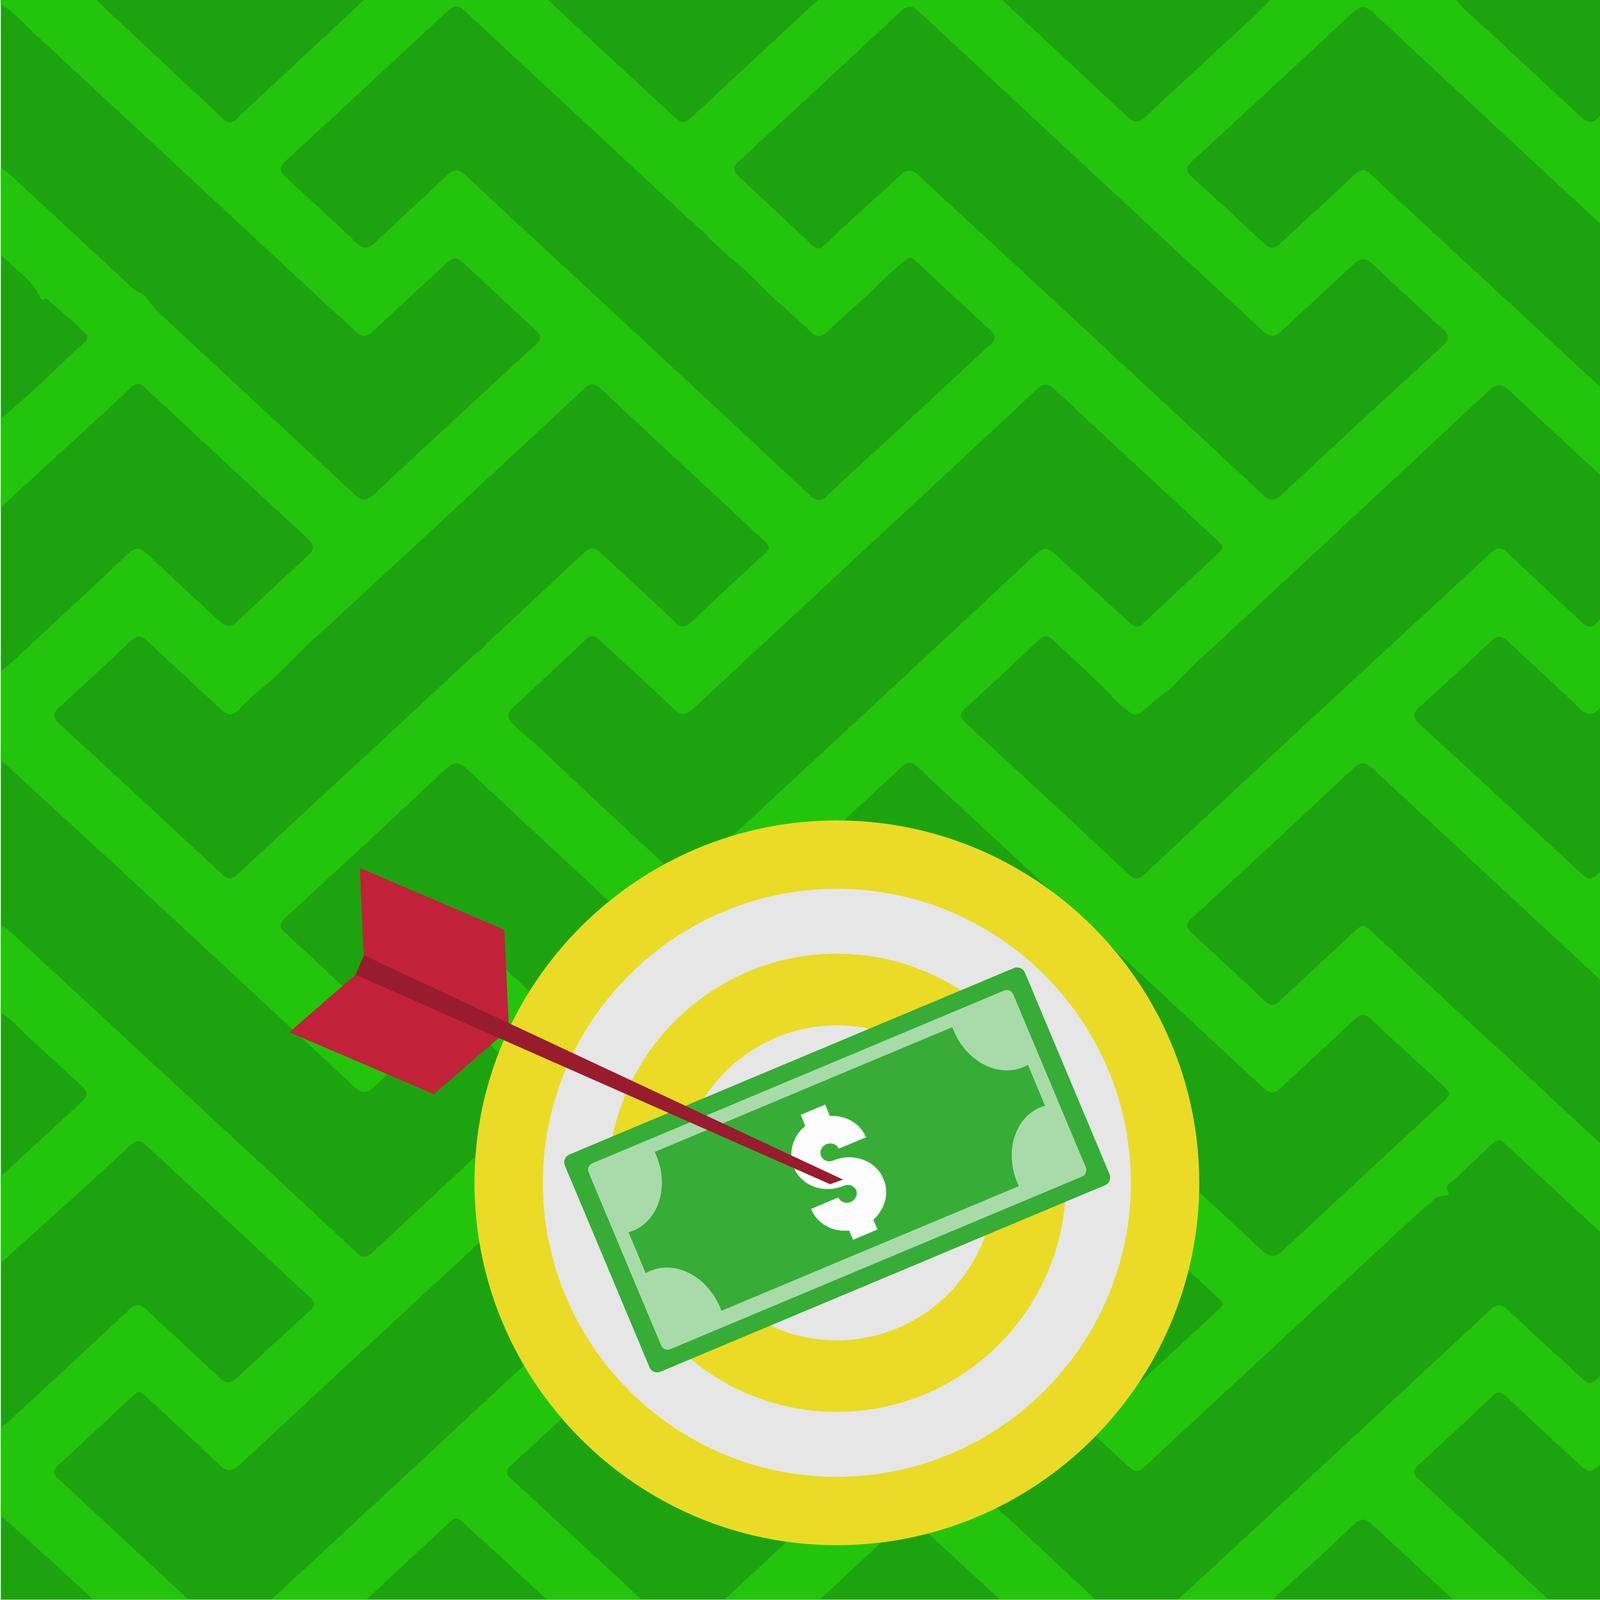 Currency Pinned Through Target By Arrow Describing Financial Planning.